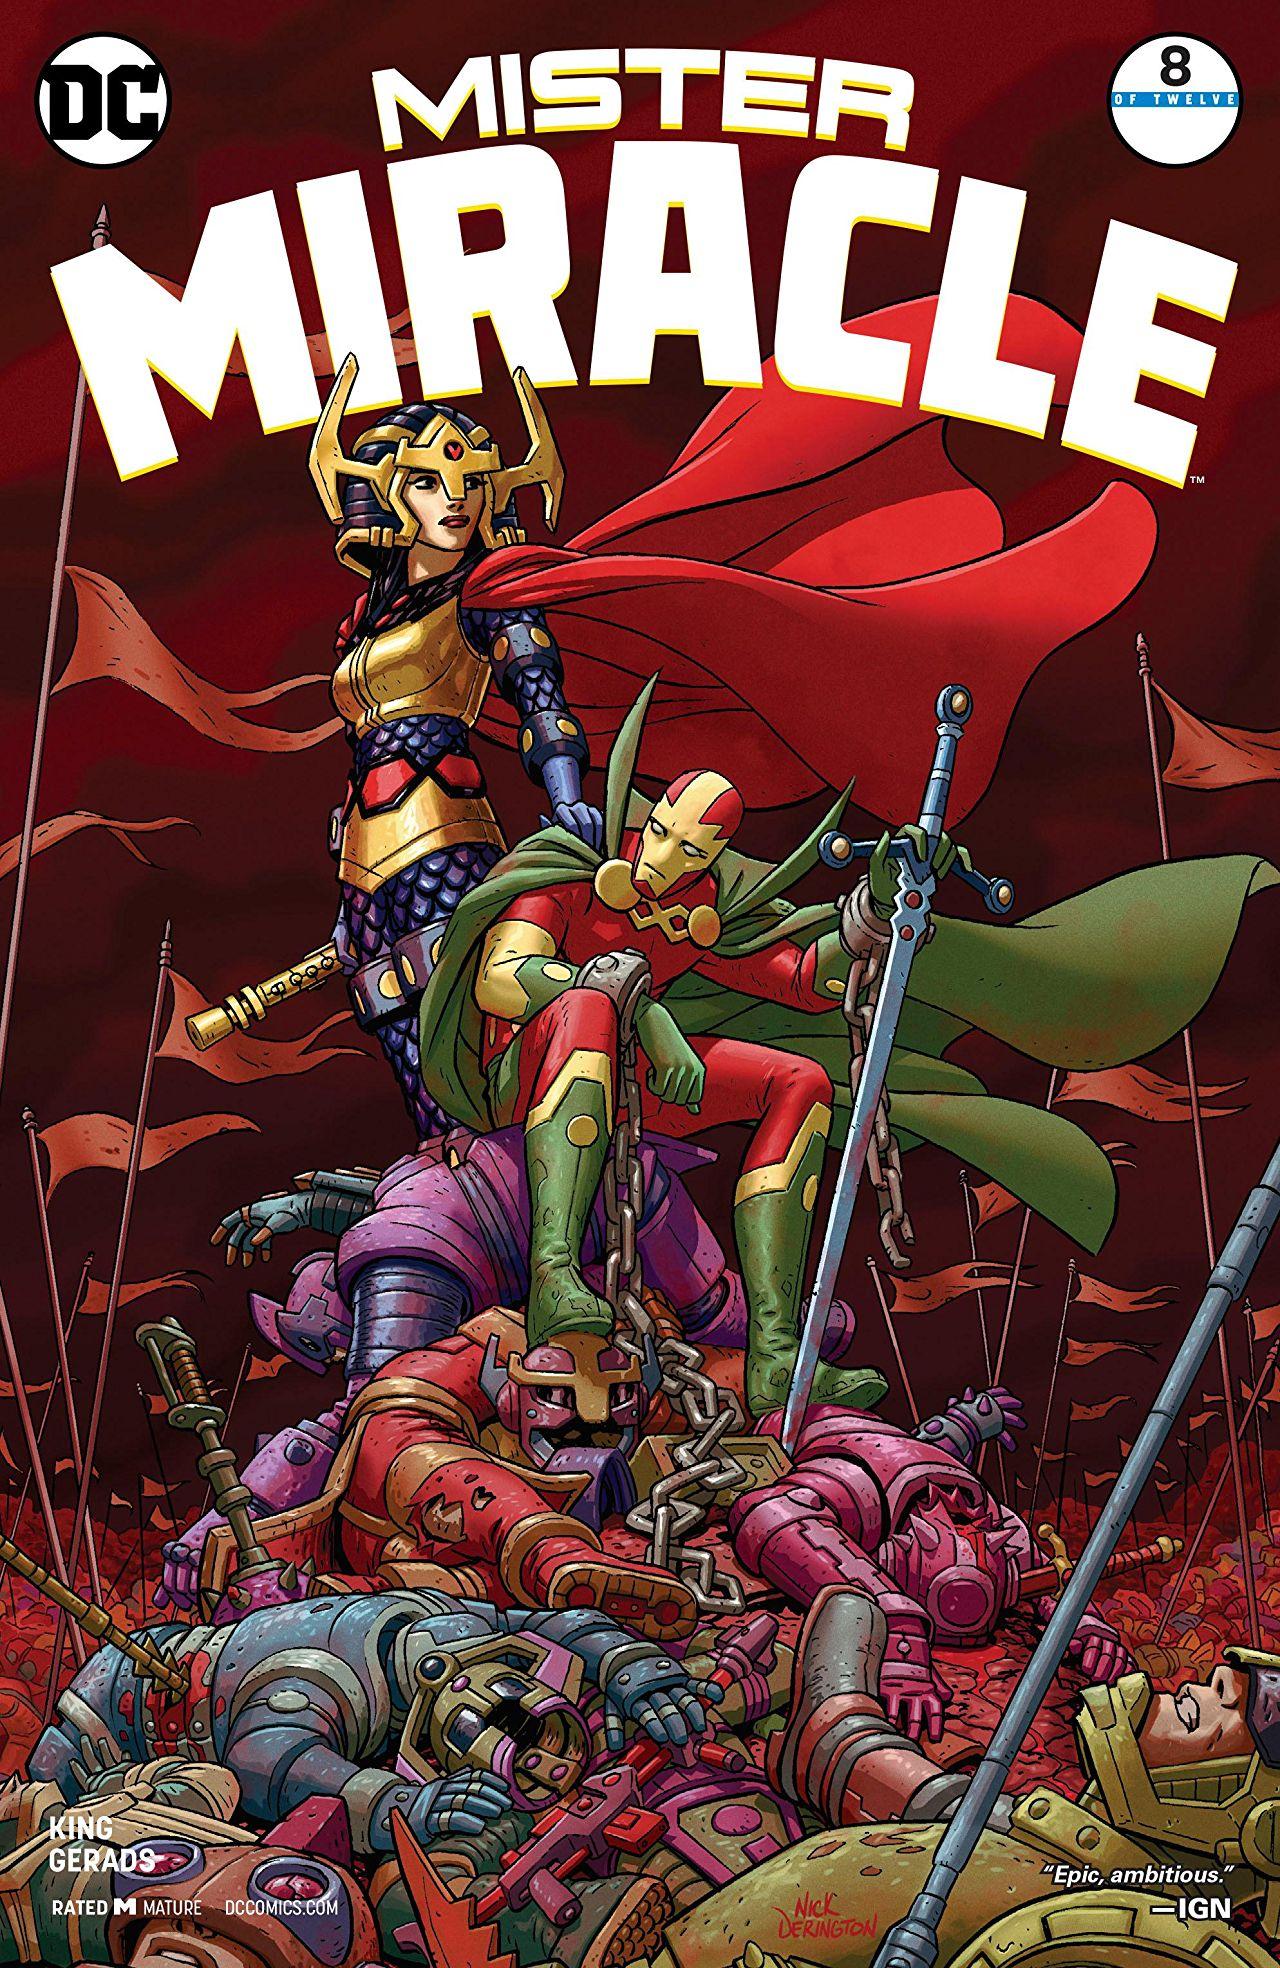 Mister Miracle Vol. 4 #8